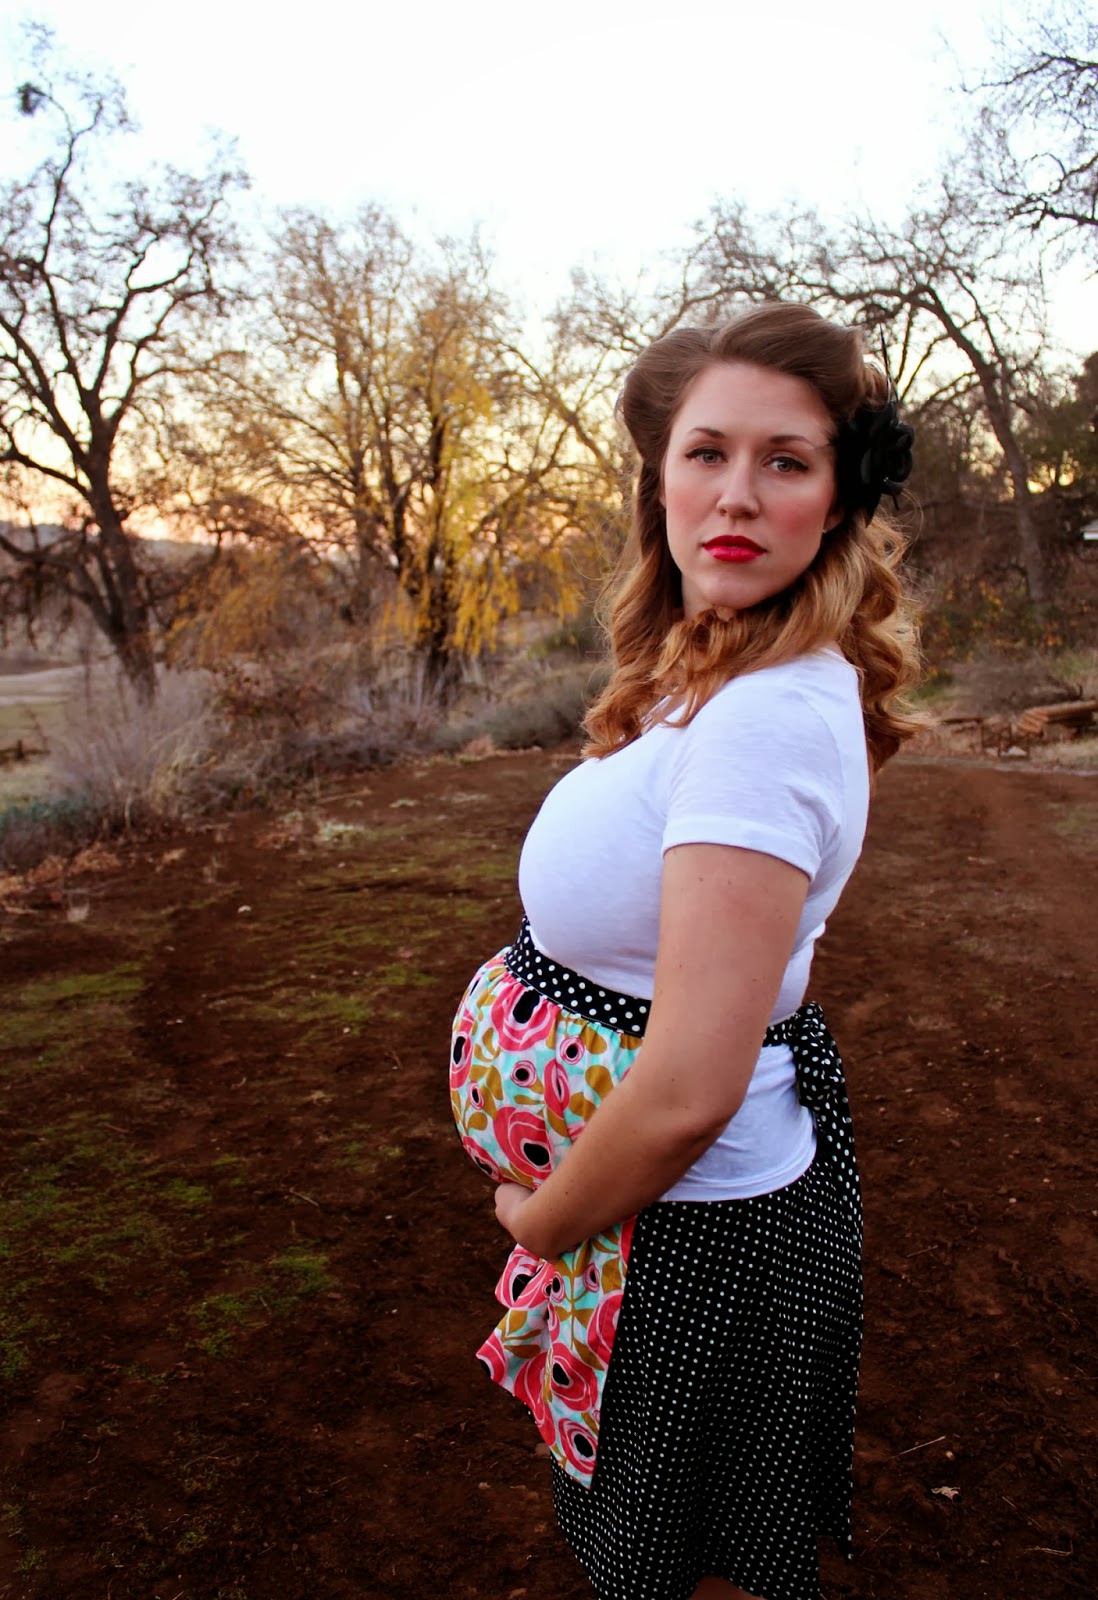 From Dahlias to Doxies: Retro Housewife Maternity Shoot